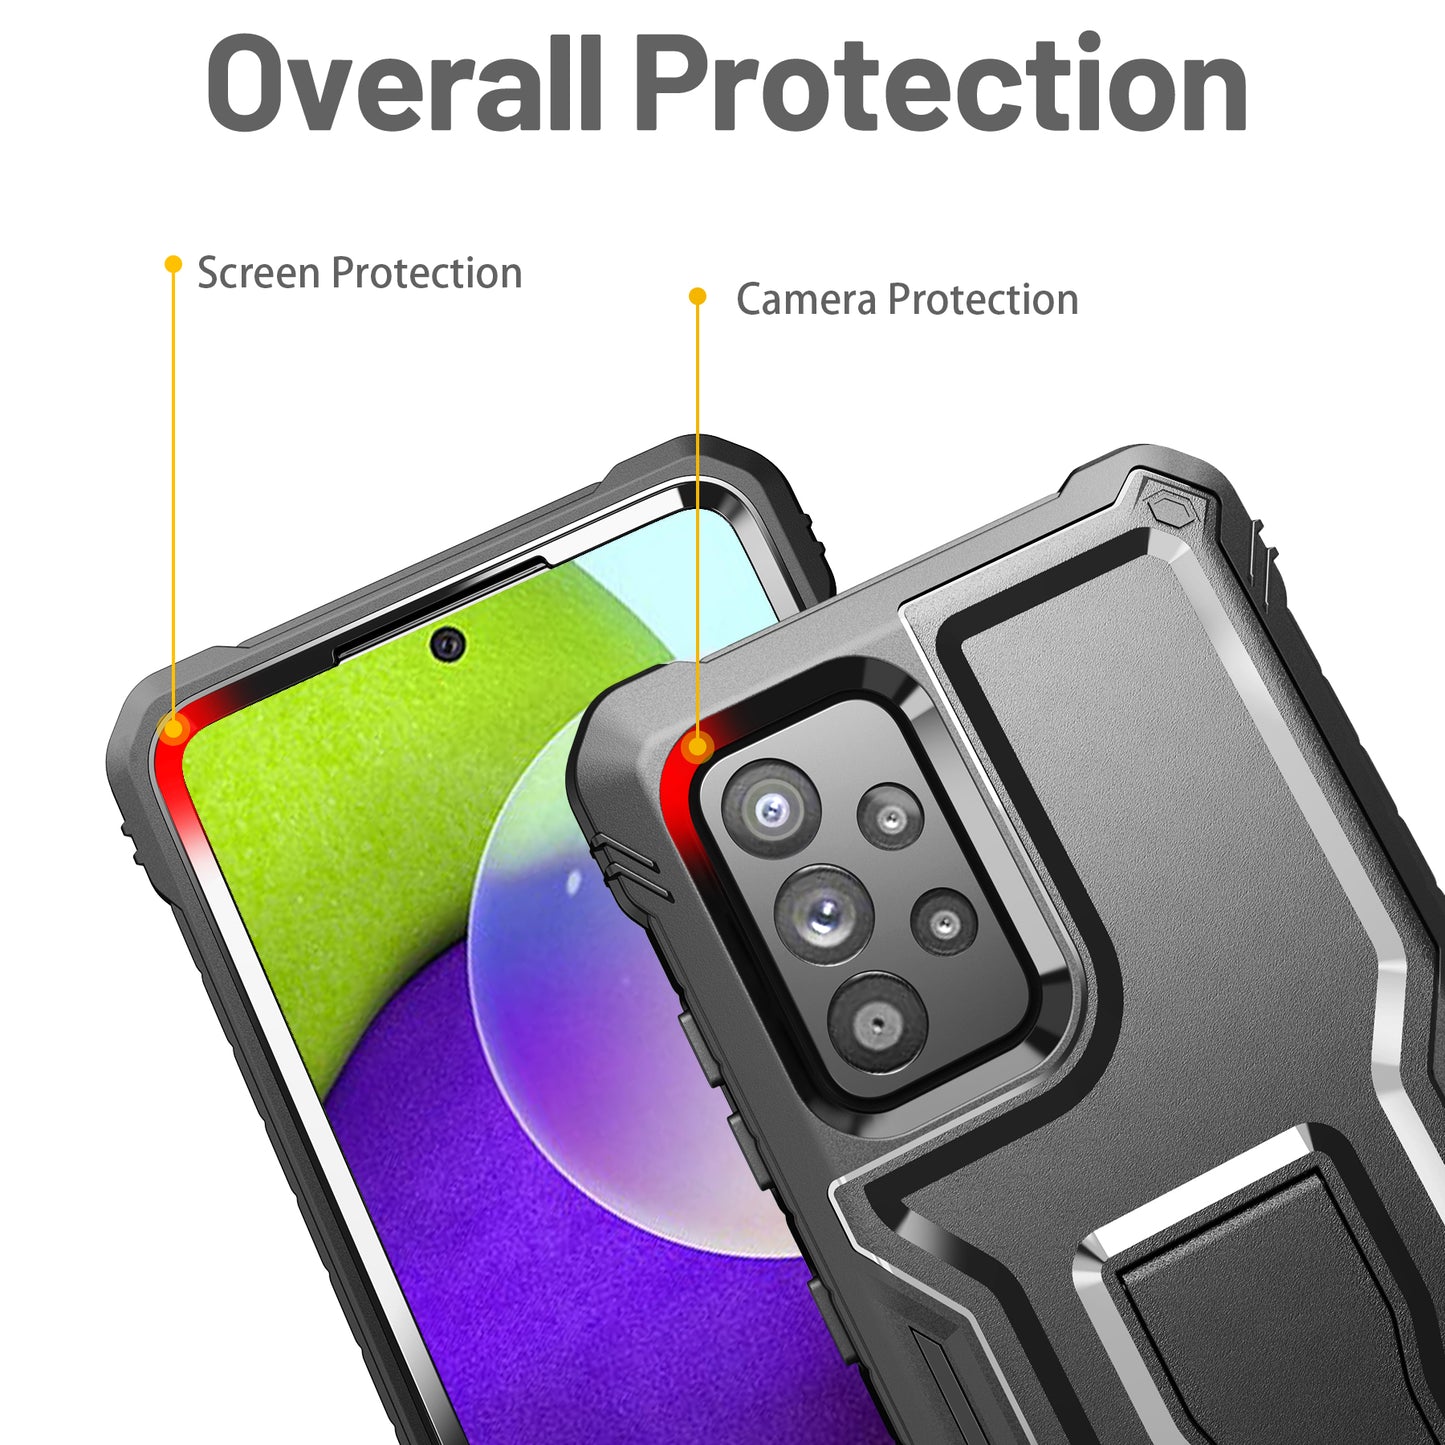 FITO Samsung A52 Case Built in Screen Protector, Dual Layer Shockproof Heavy Duty Case with Kickstand Compatible with Samsung Galaxy A52 Phone